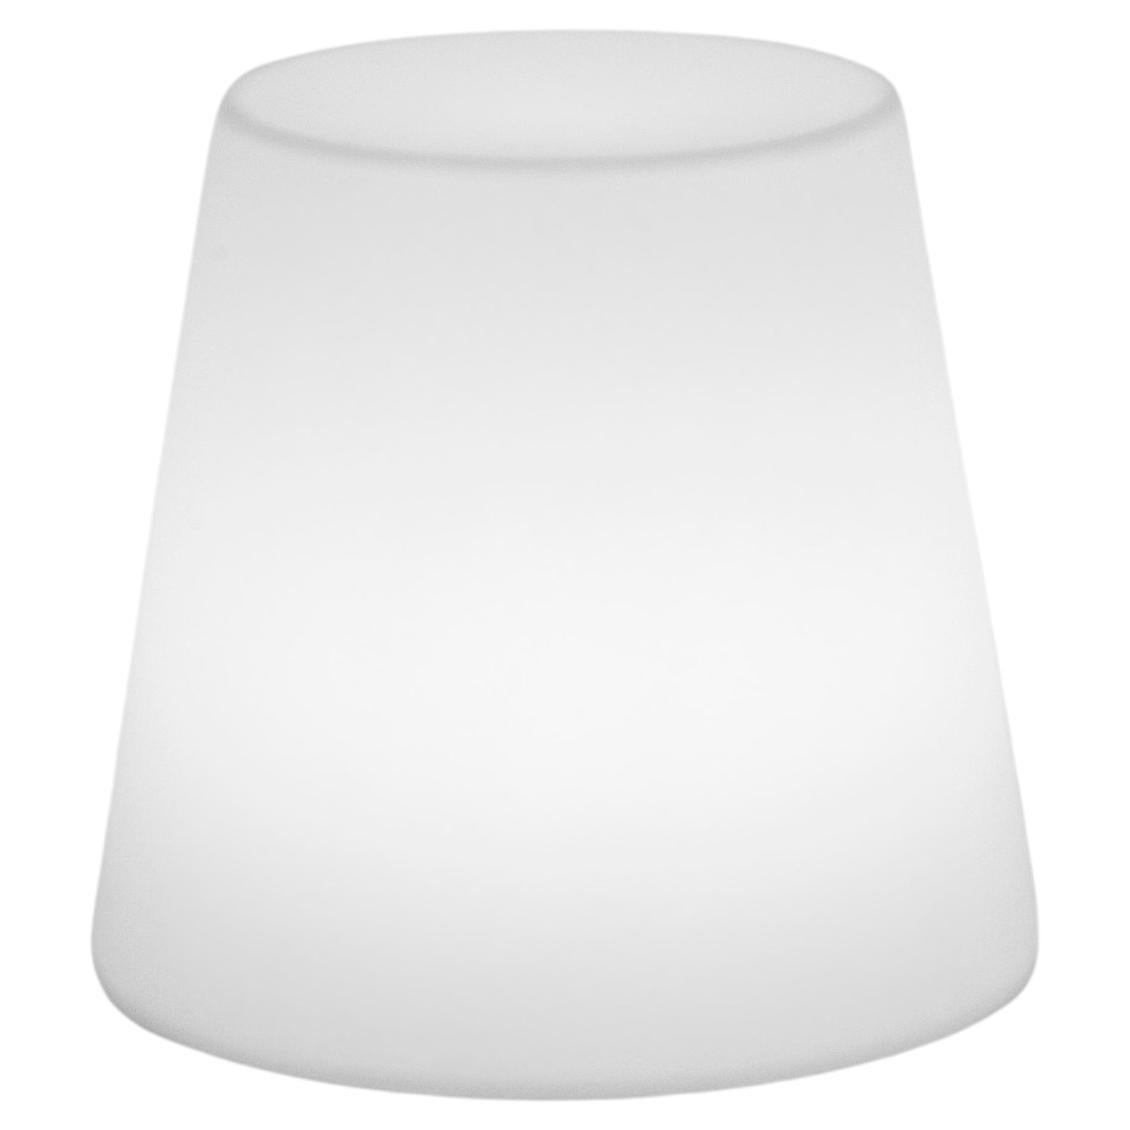 Slide Design Ali Baba Stool with LED in Milky White by Giò Colonna Romano For Sale